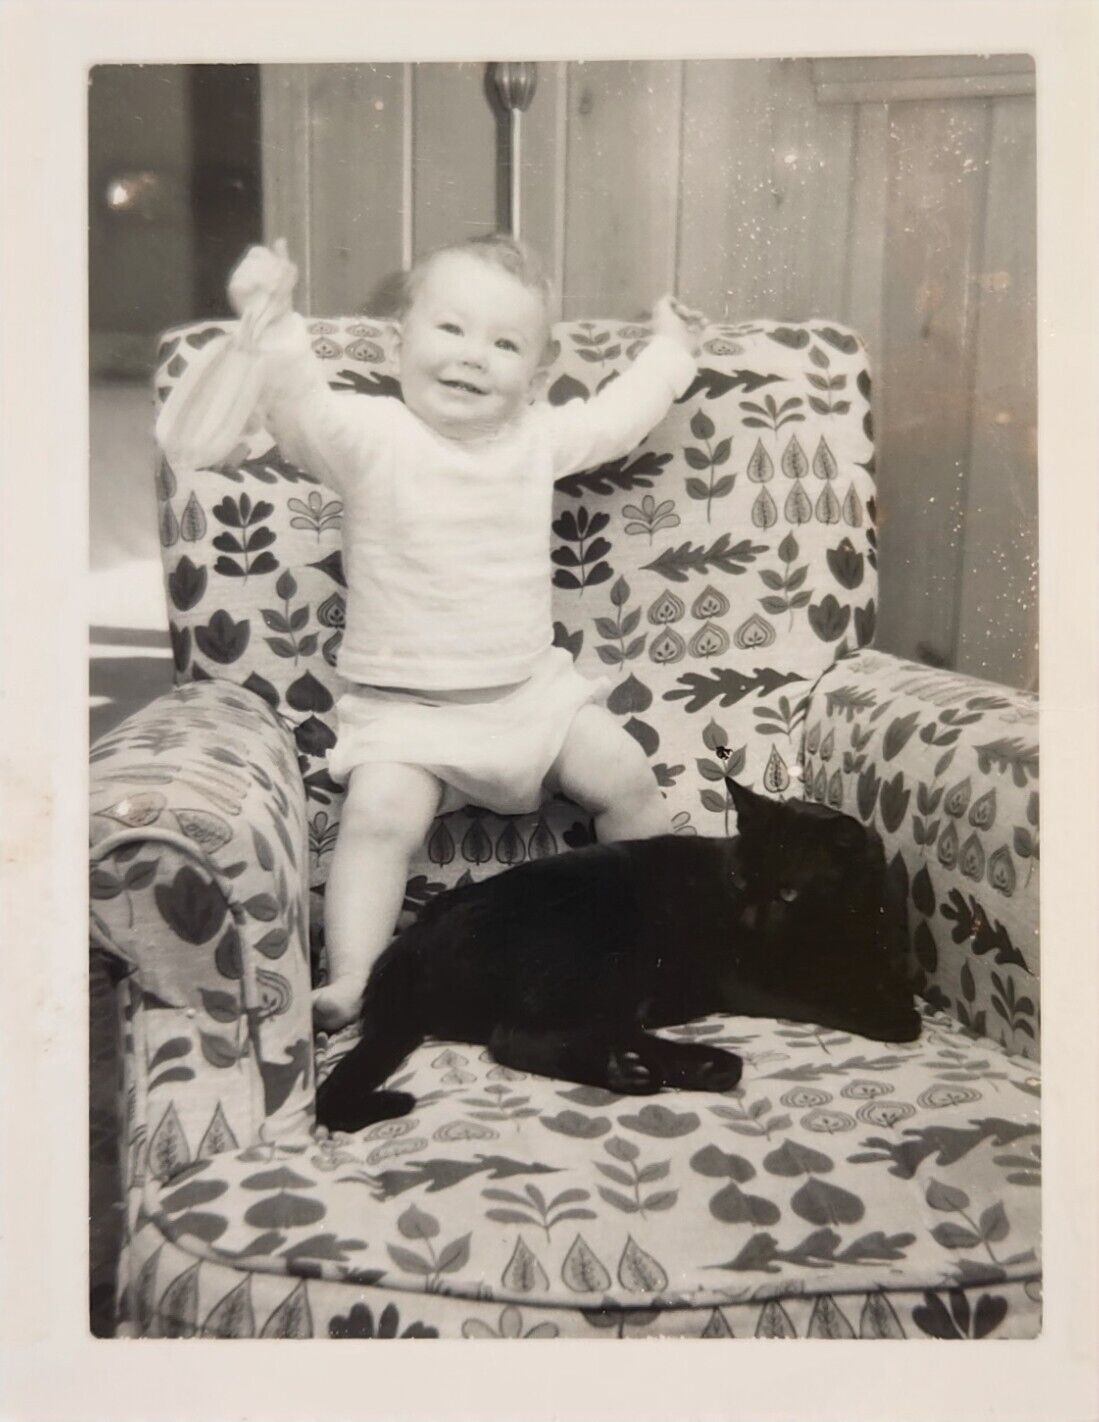 Vintage Black And White Photograph Of A Adorable Baby And A Big Cat